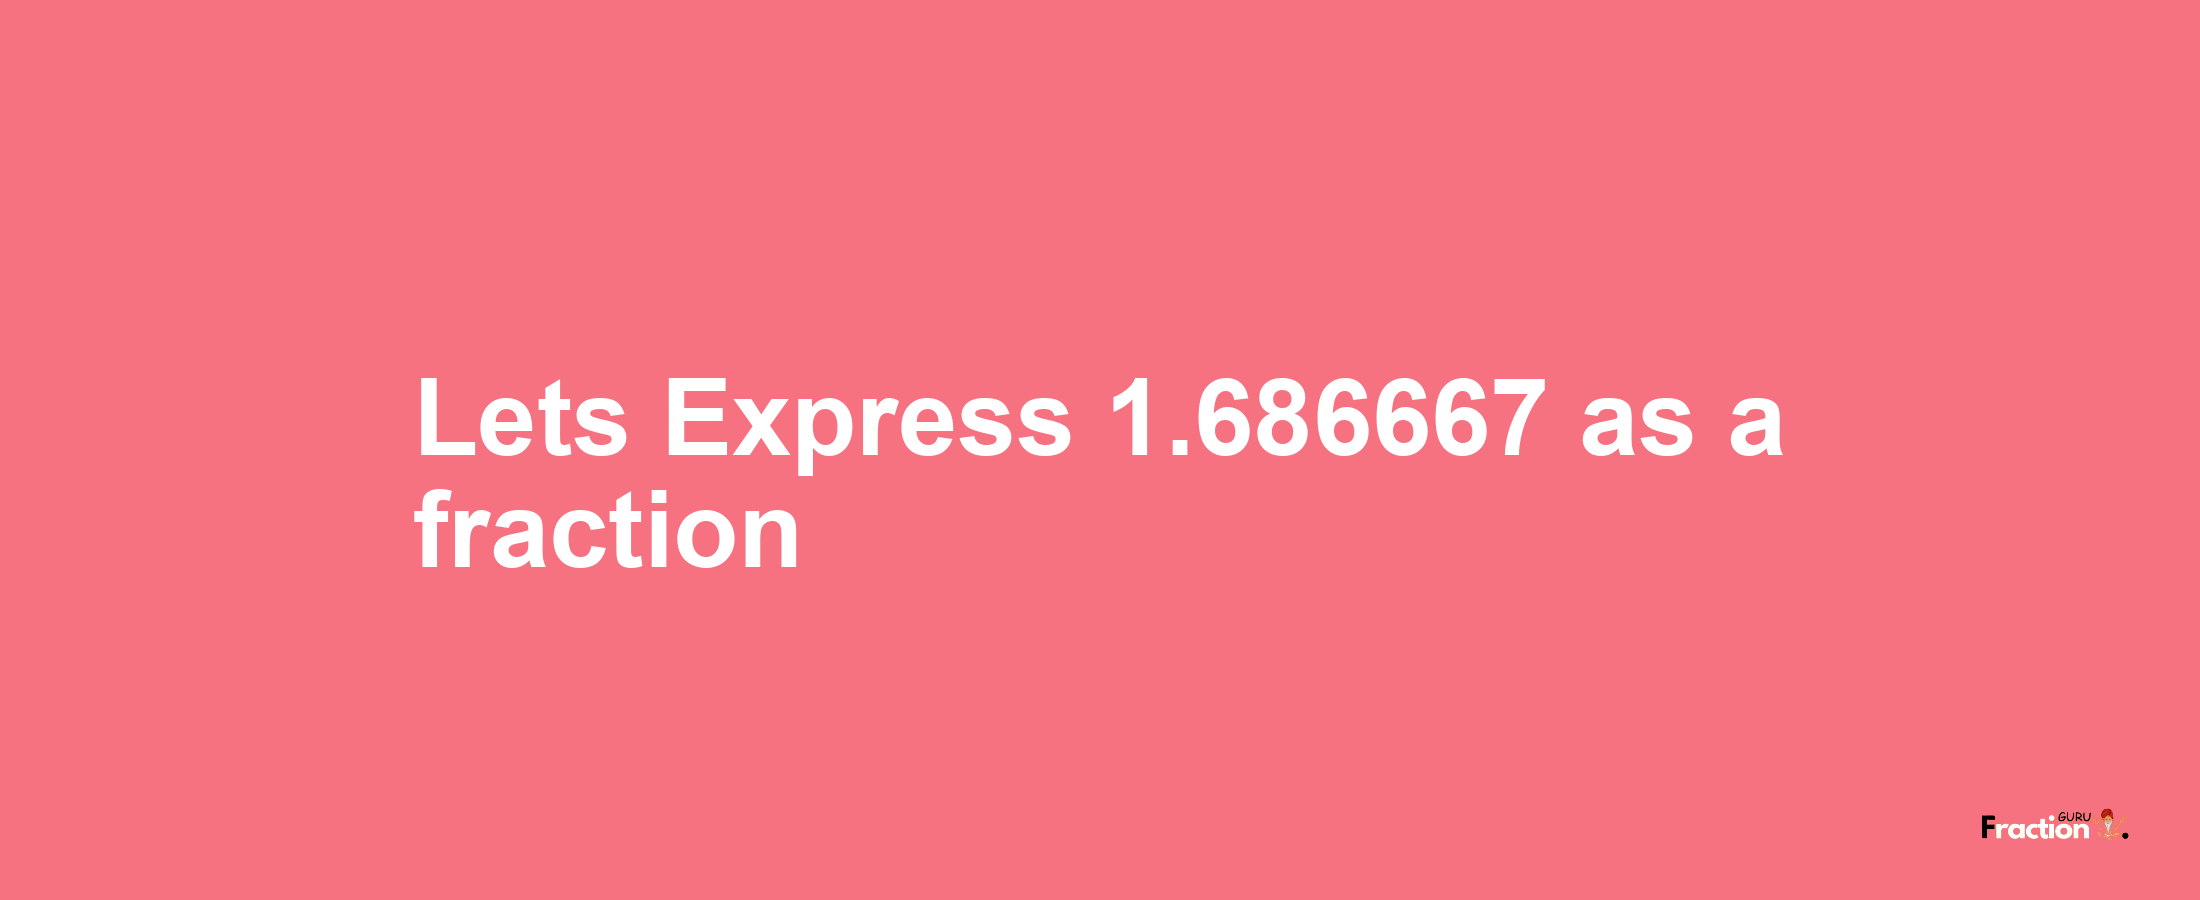 Lets Express 1.686667 as afraction